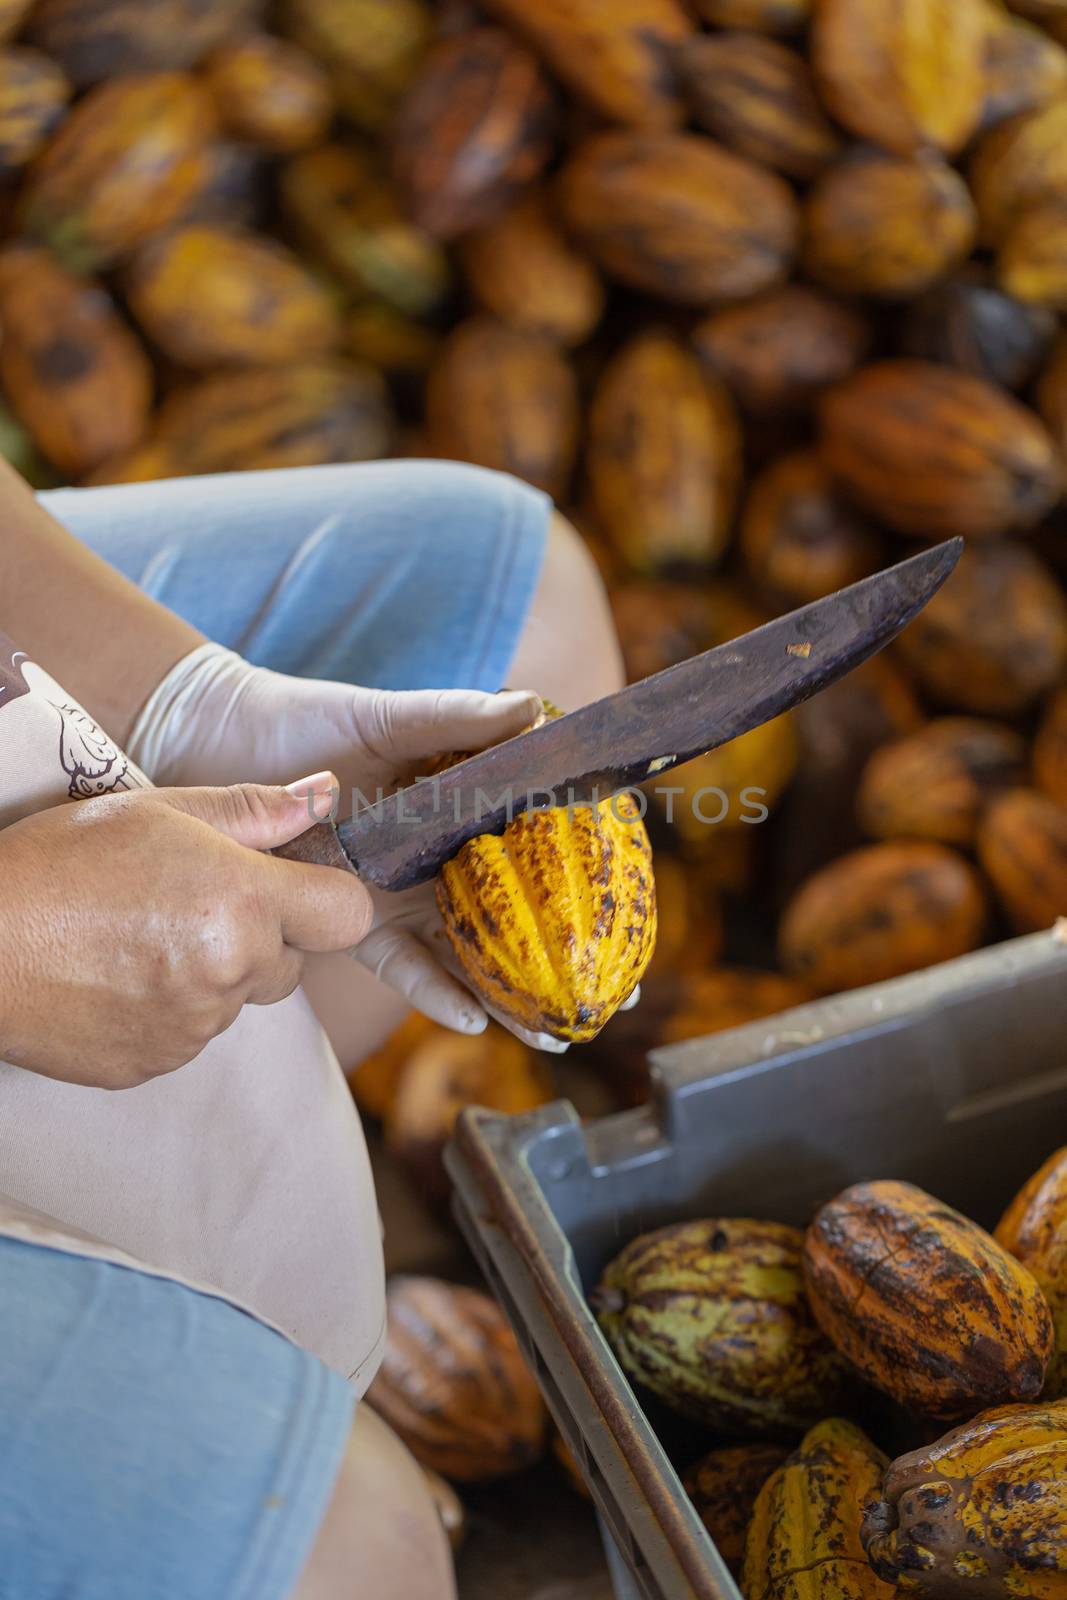 man holding a ripe cocoa fruit with beans inside and Bring seeds by kaiskynet